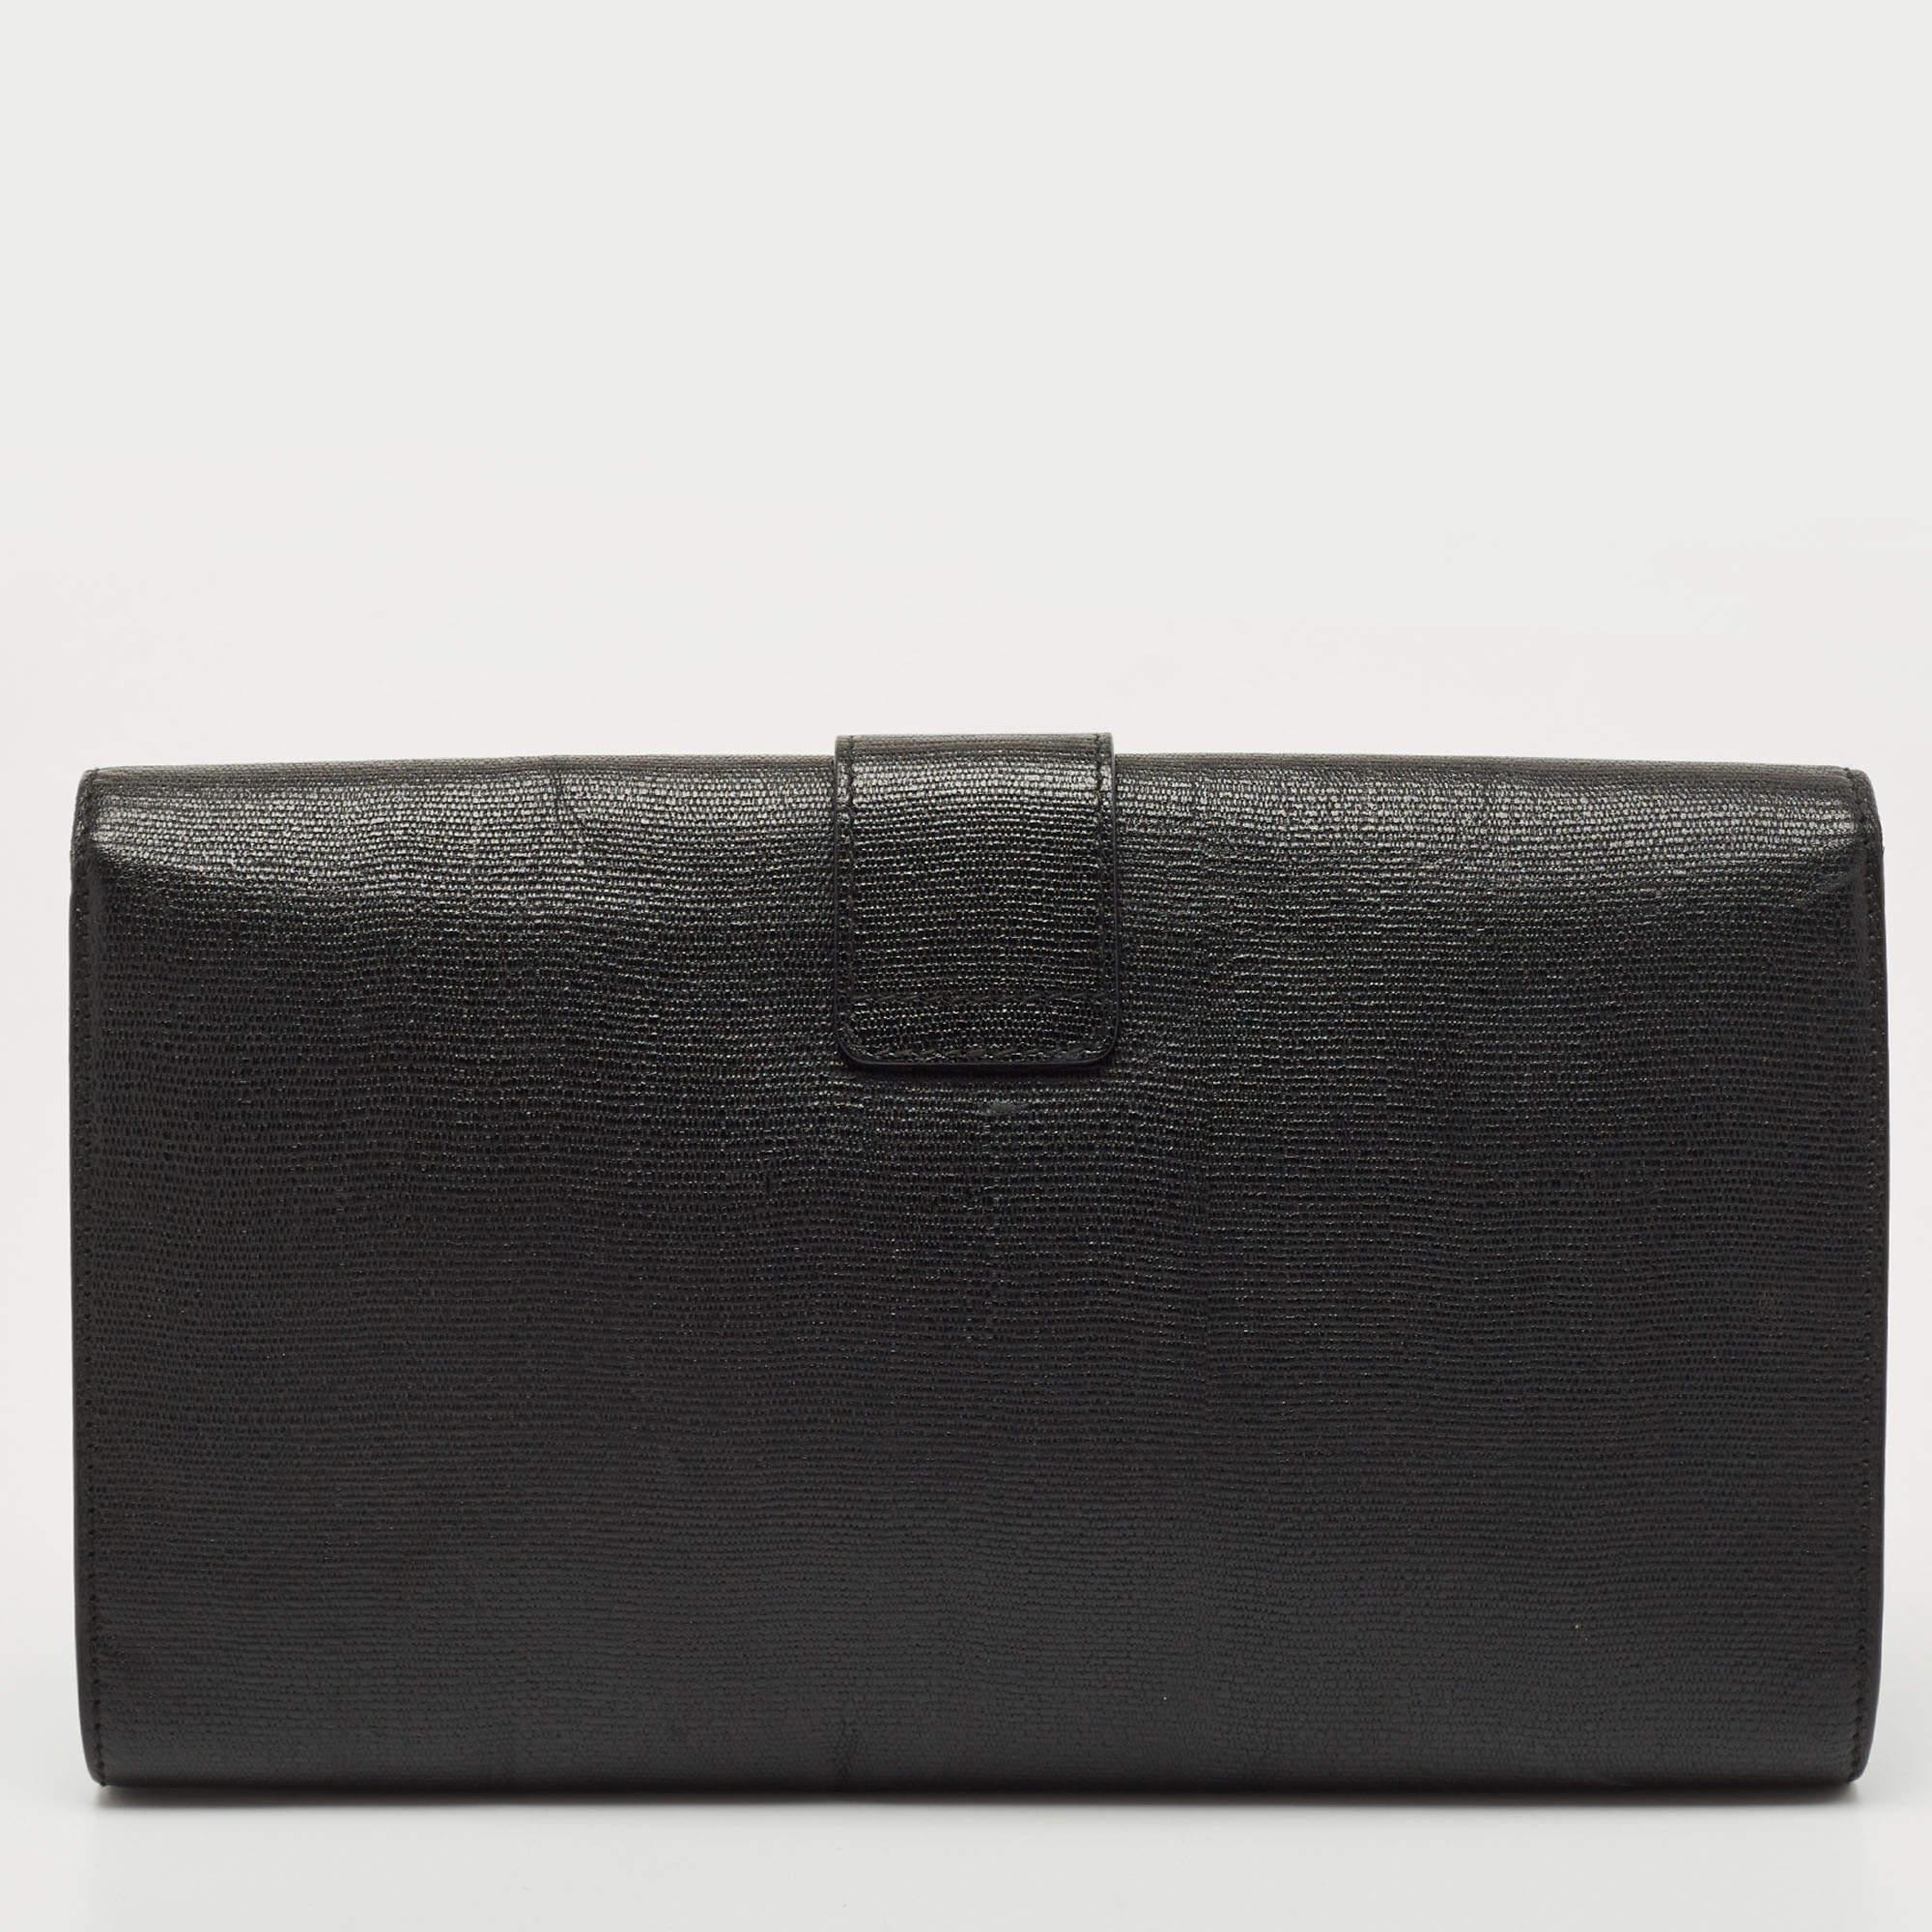 This designer clutch for women has the kind of design that ensures high appeal, whether held in your hand or tucked under your arm. It is a meticulously-crafted piece bound to last a long time.

Includes: Info Booklet